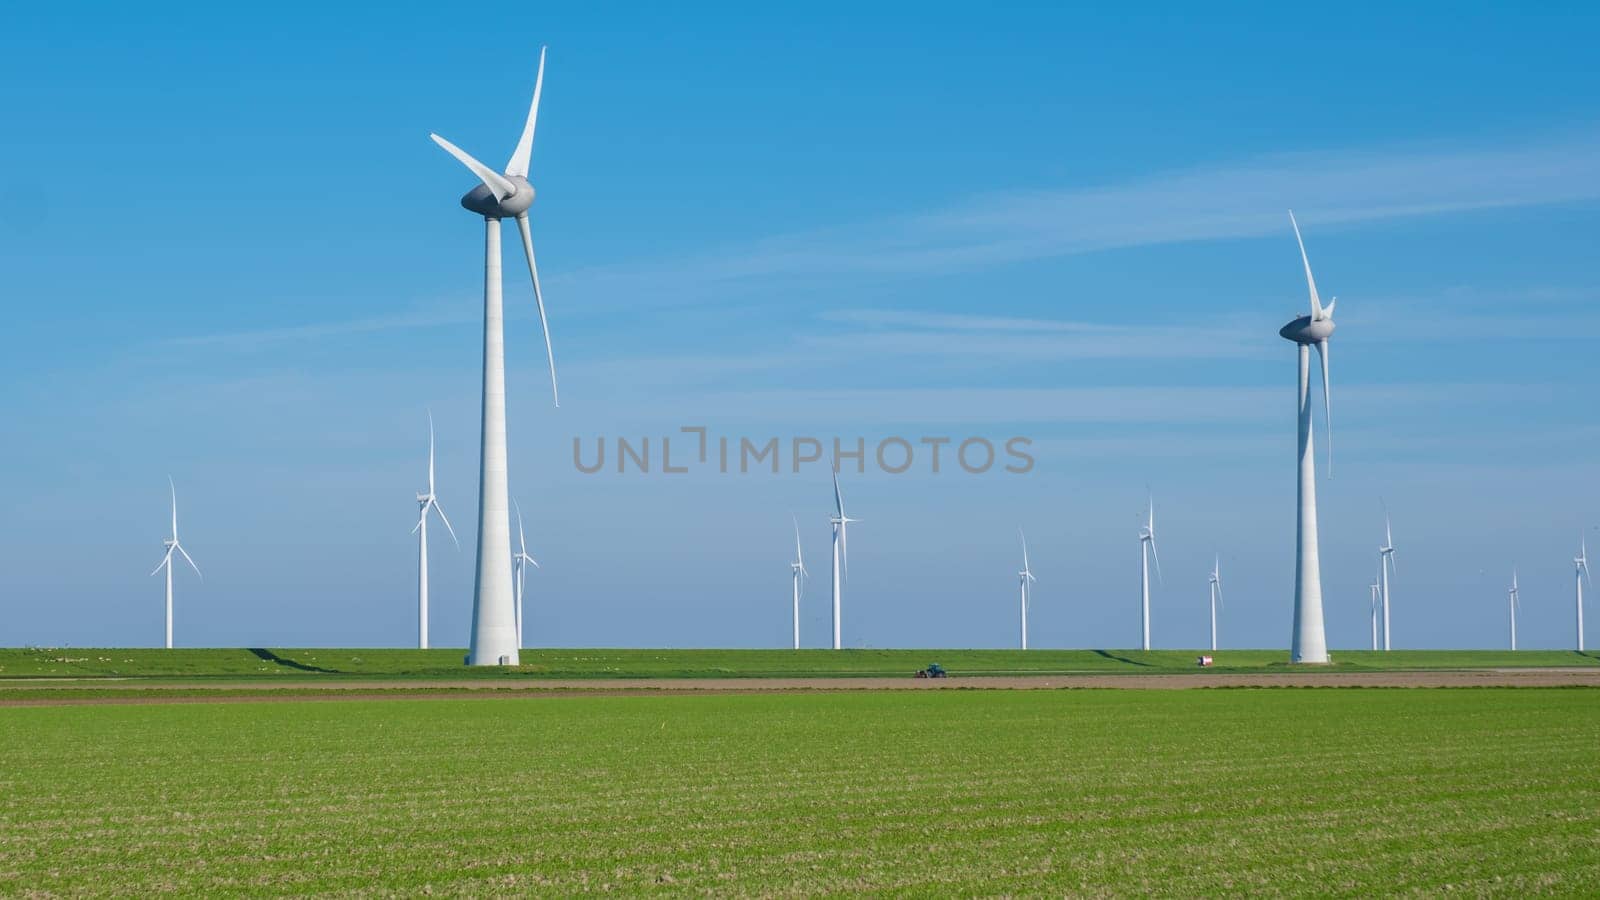 A vast field of lush green grass stretches out in the foreground, while a group of towering windmills spin gracefully in the distance against the clear sky of Flevoland, Netherlands by fokkebok